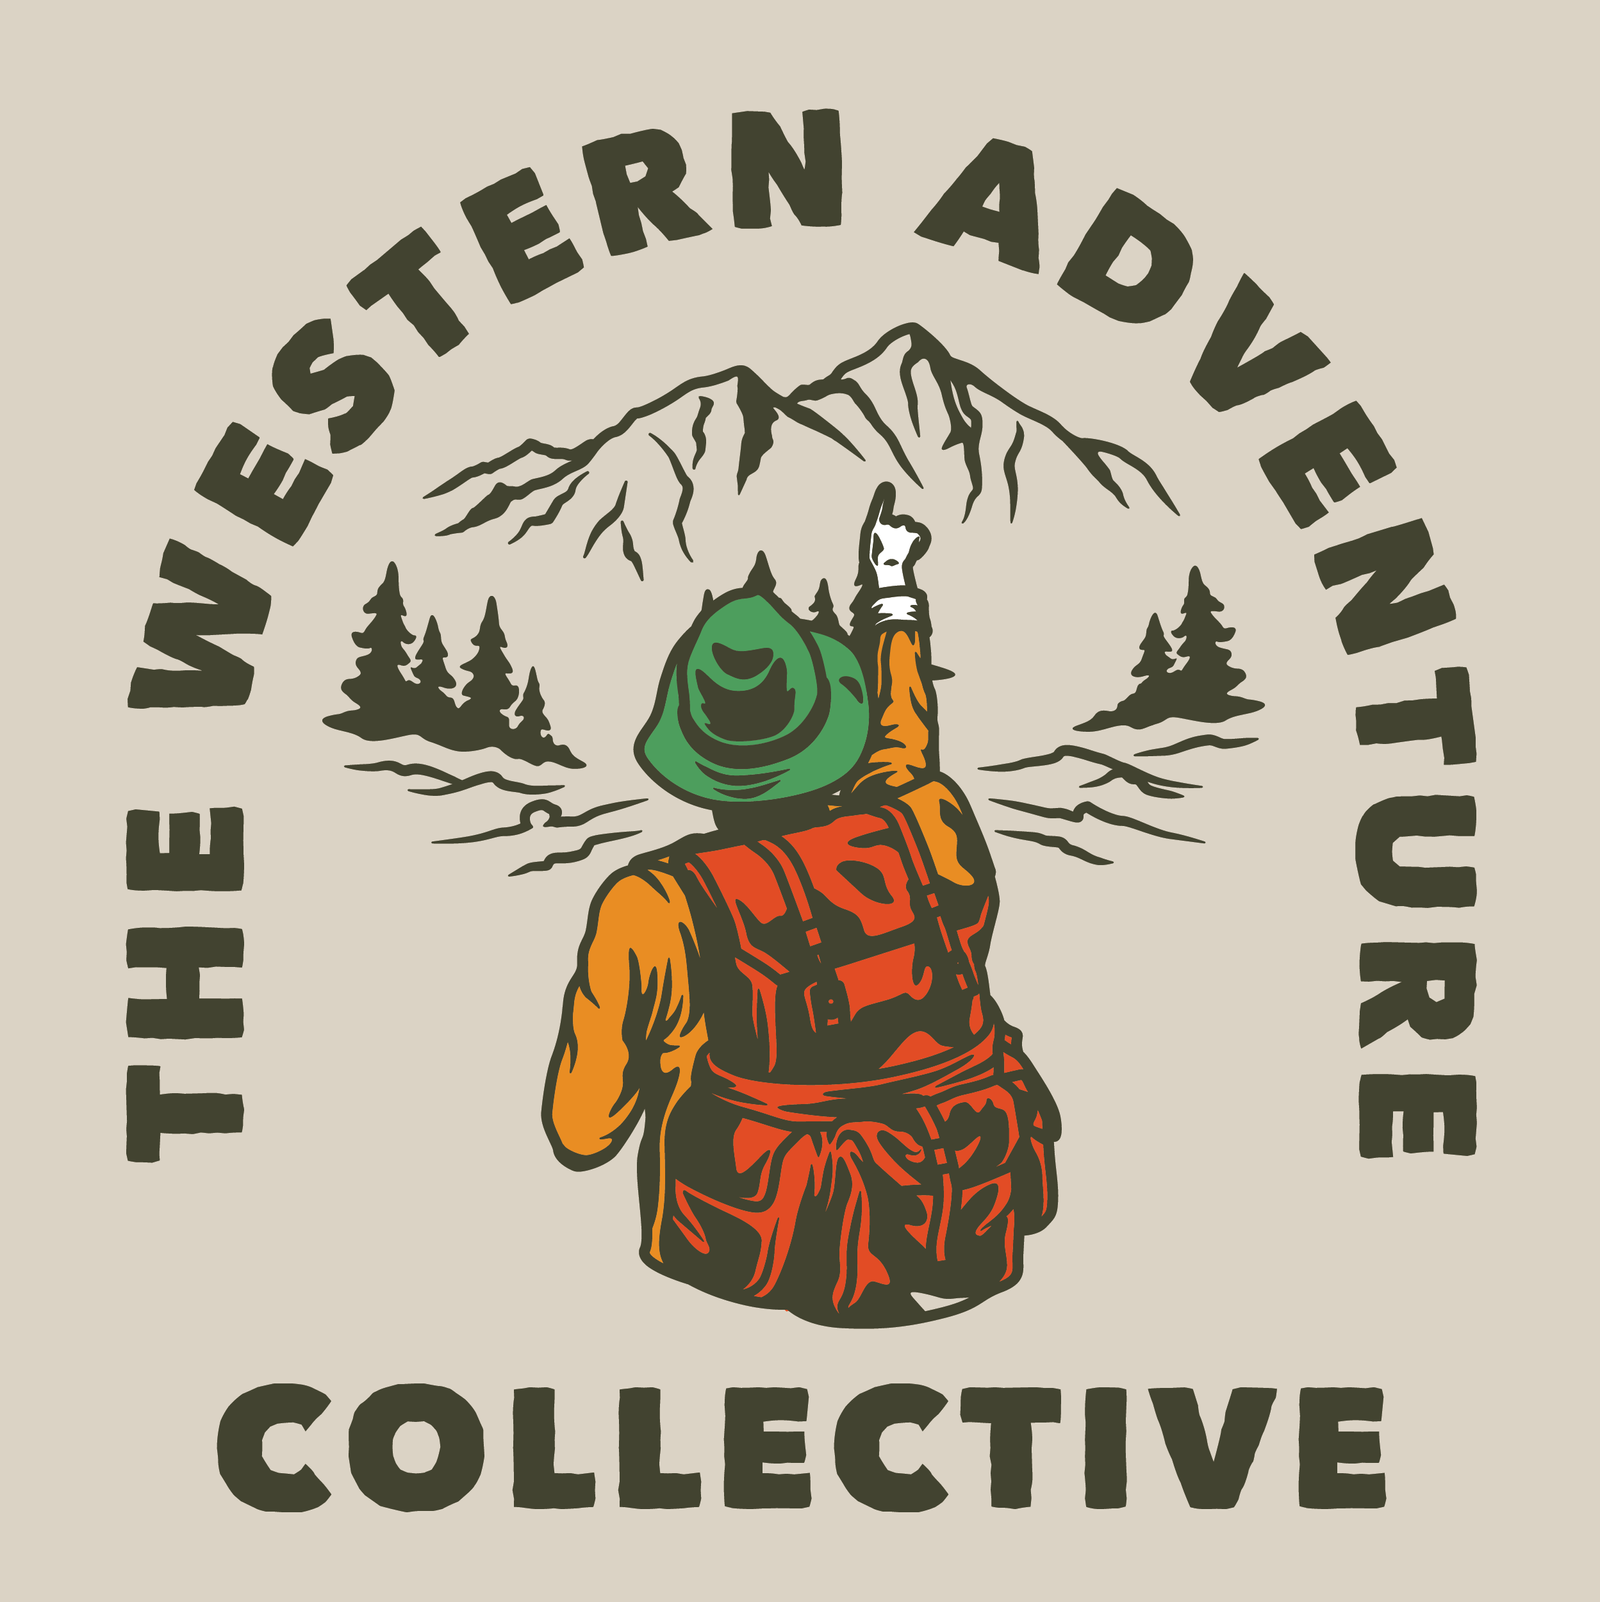 The Western Adventure Collective